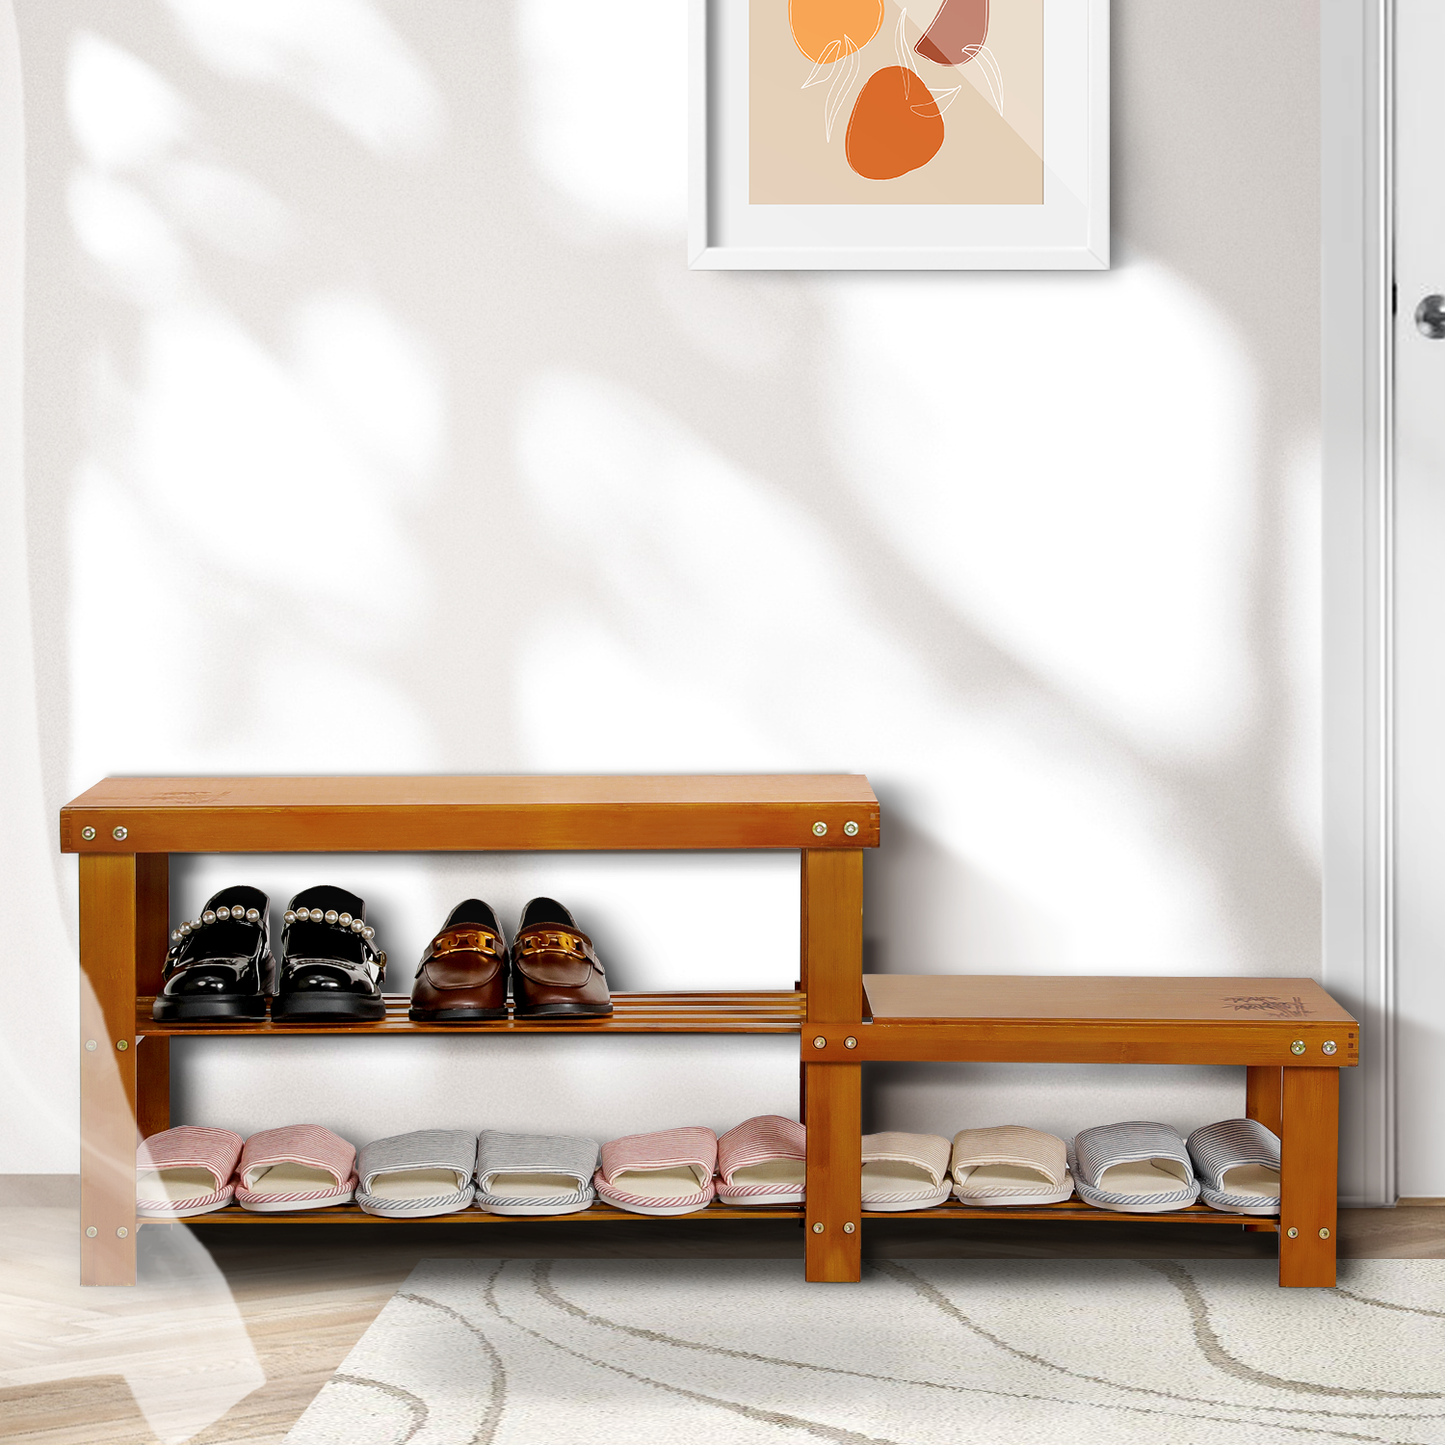 Double Row Shoe Rack Organizer - Changing Bench - 2 Tier - Brown